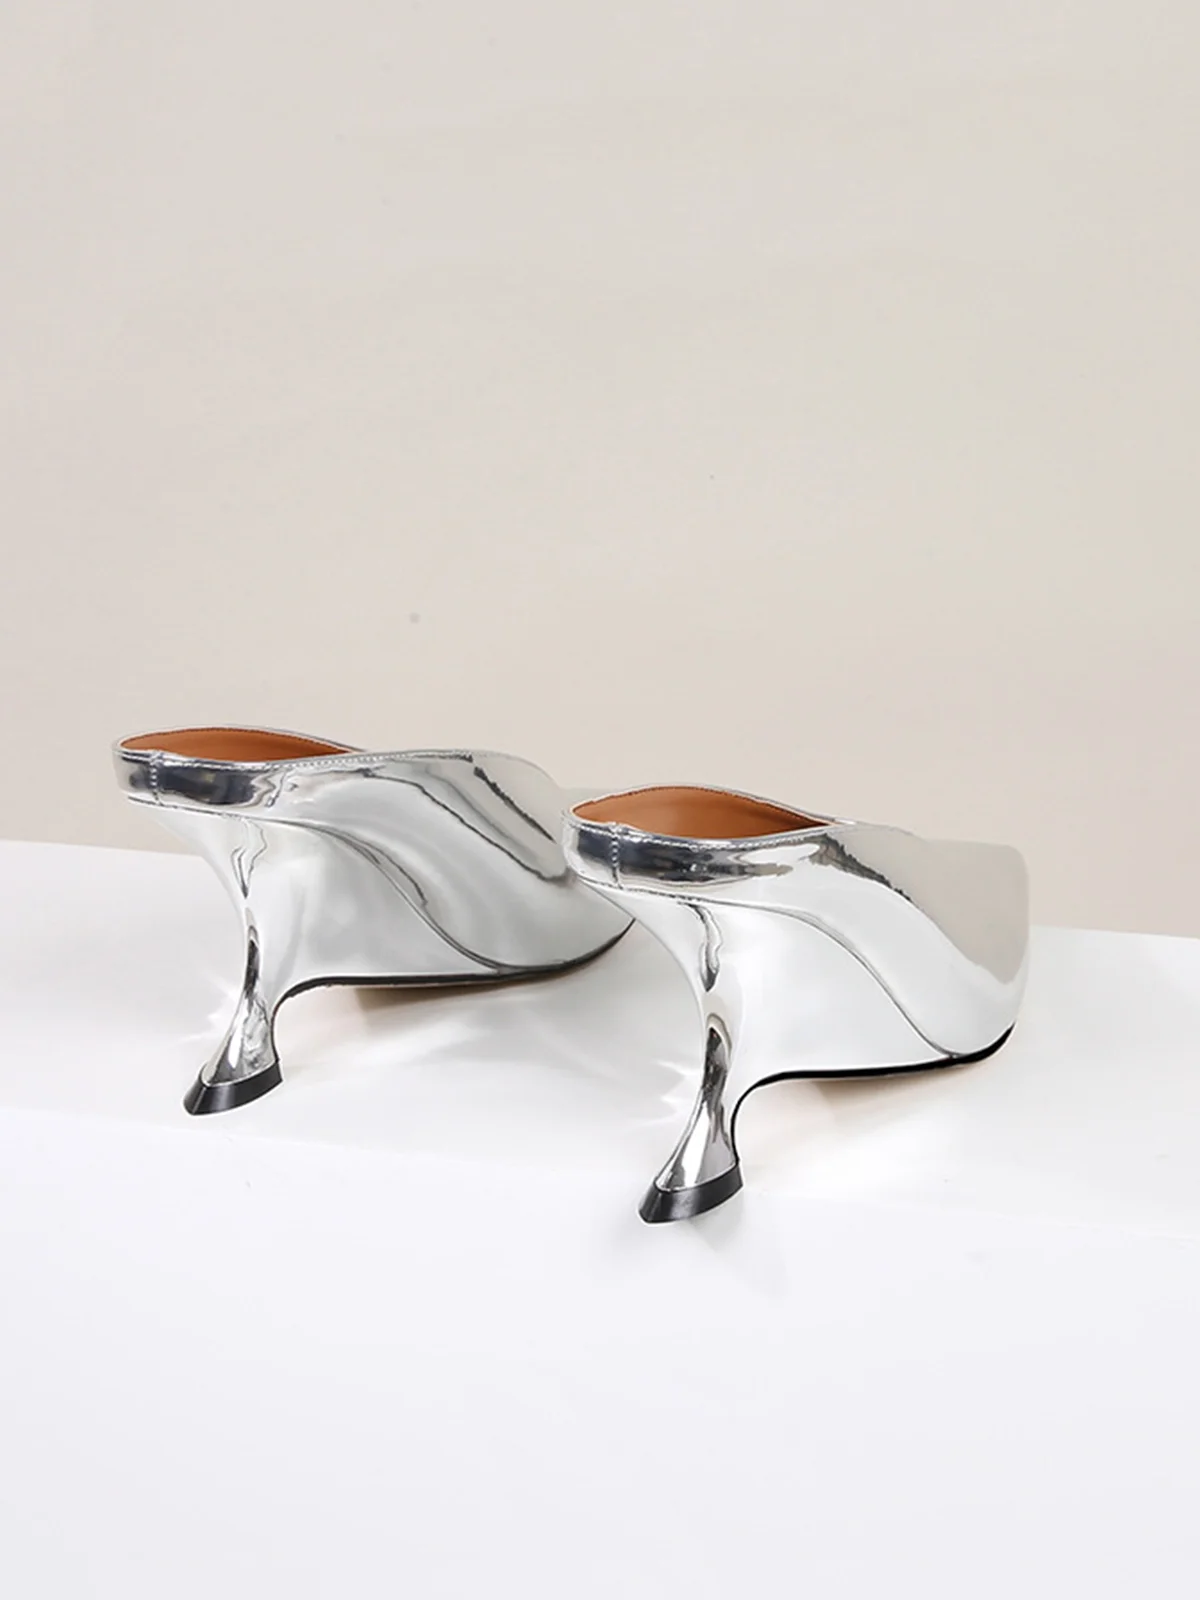 Glamorous Patent Leather Sculptural Wedge Heel Mules